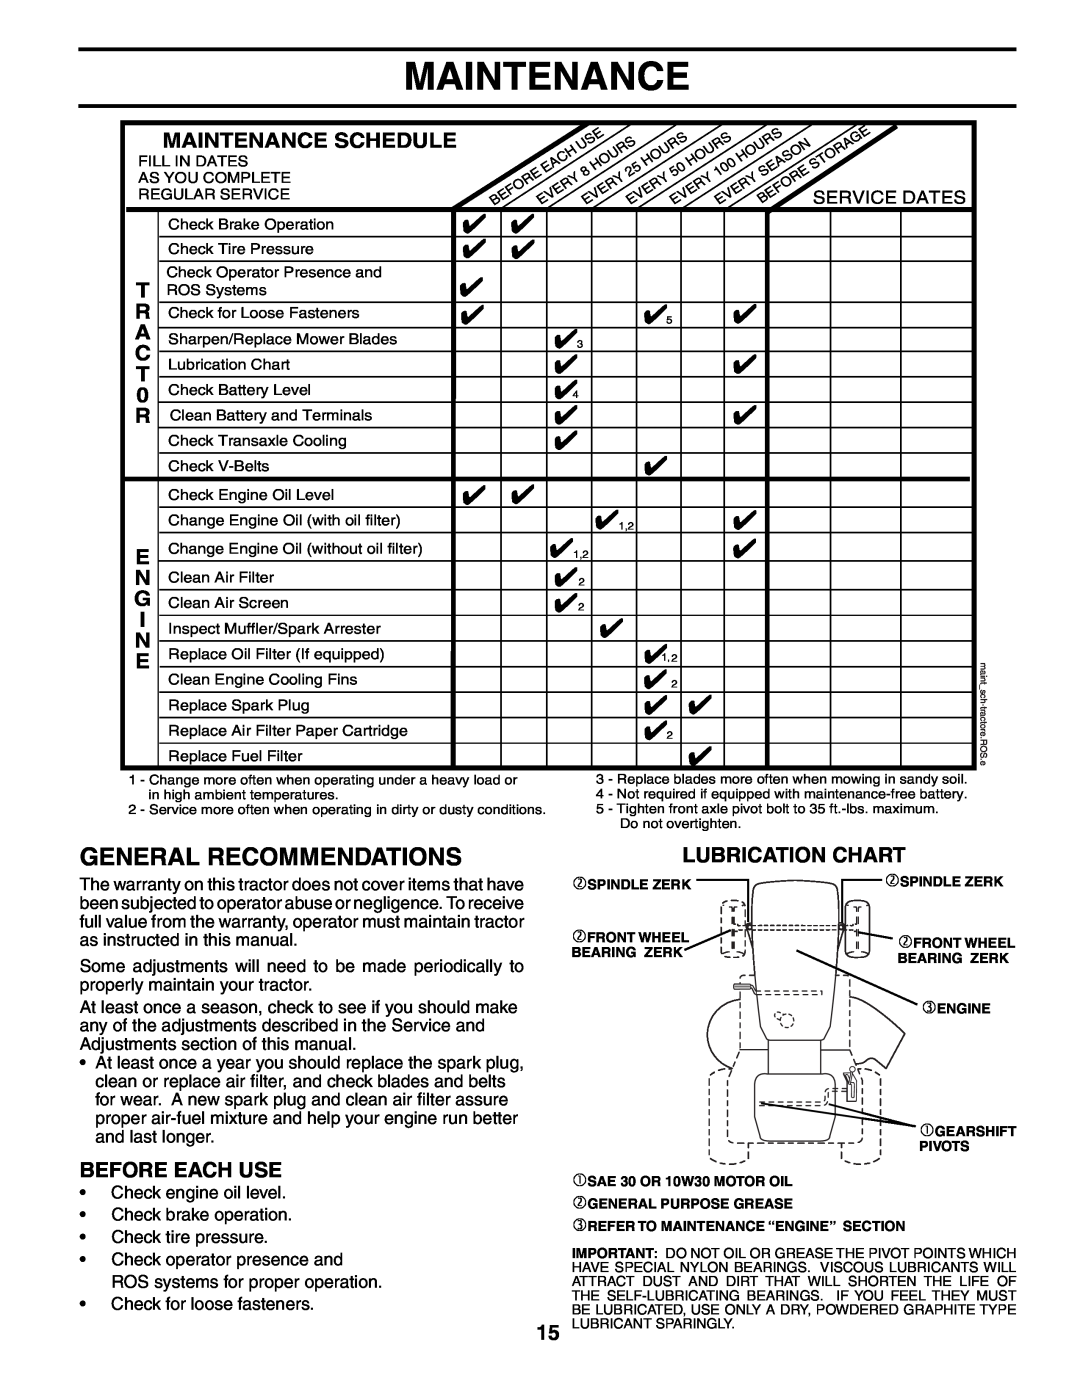 Poulan 194993 manual General Recommendations, Before Each Use, Lubrication Chart, Maintenance Schedule 